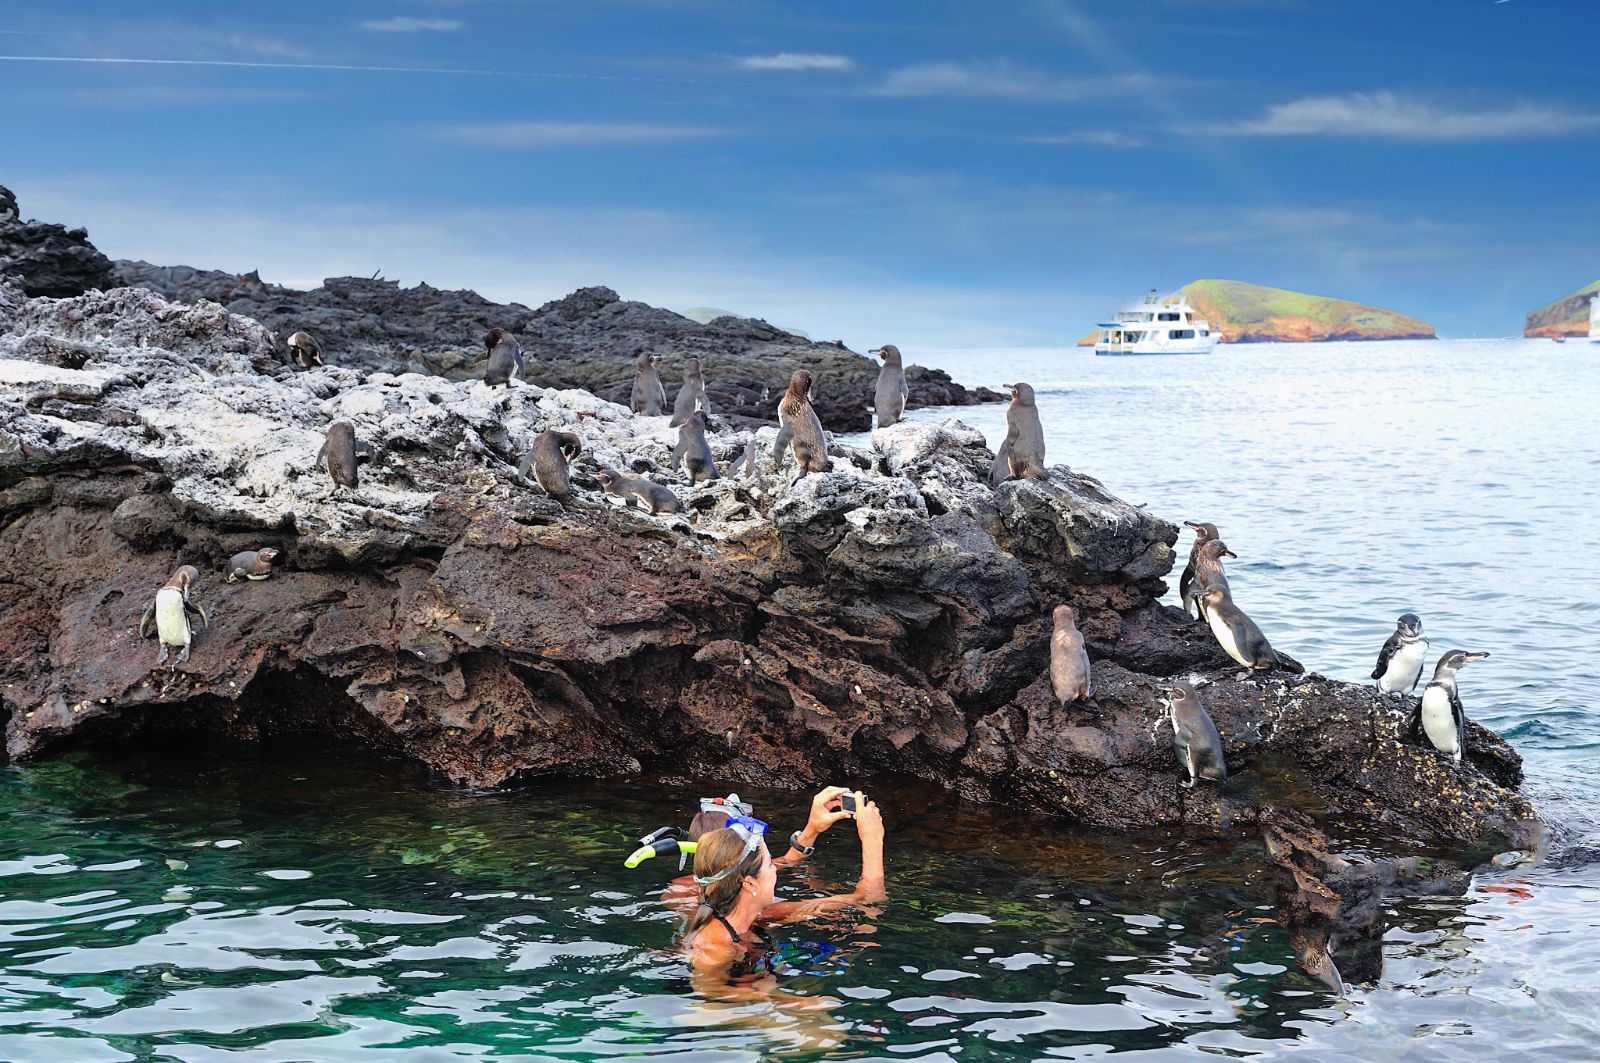 Penguins spotted while snorkelling on the Galapagos Islands from Pikaia Lodge in Ecuador